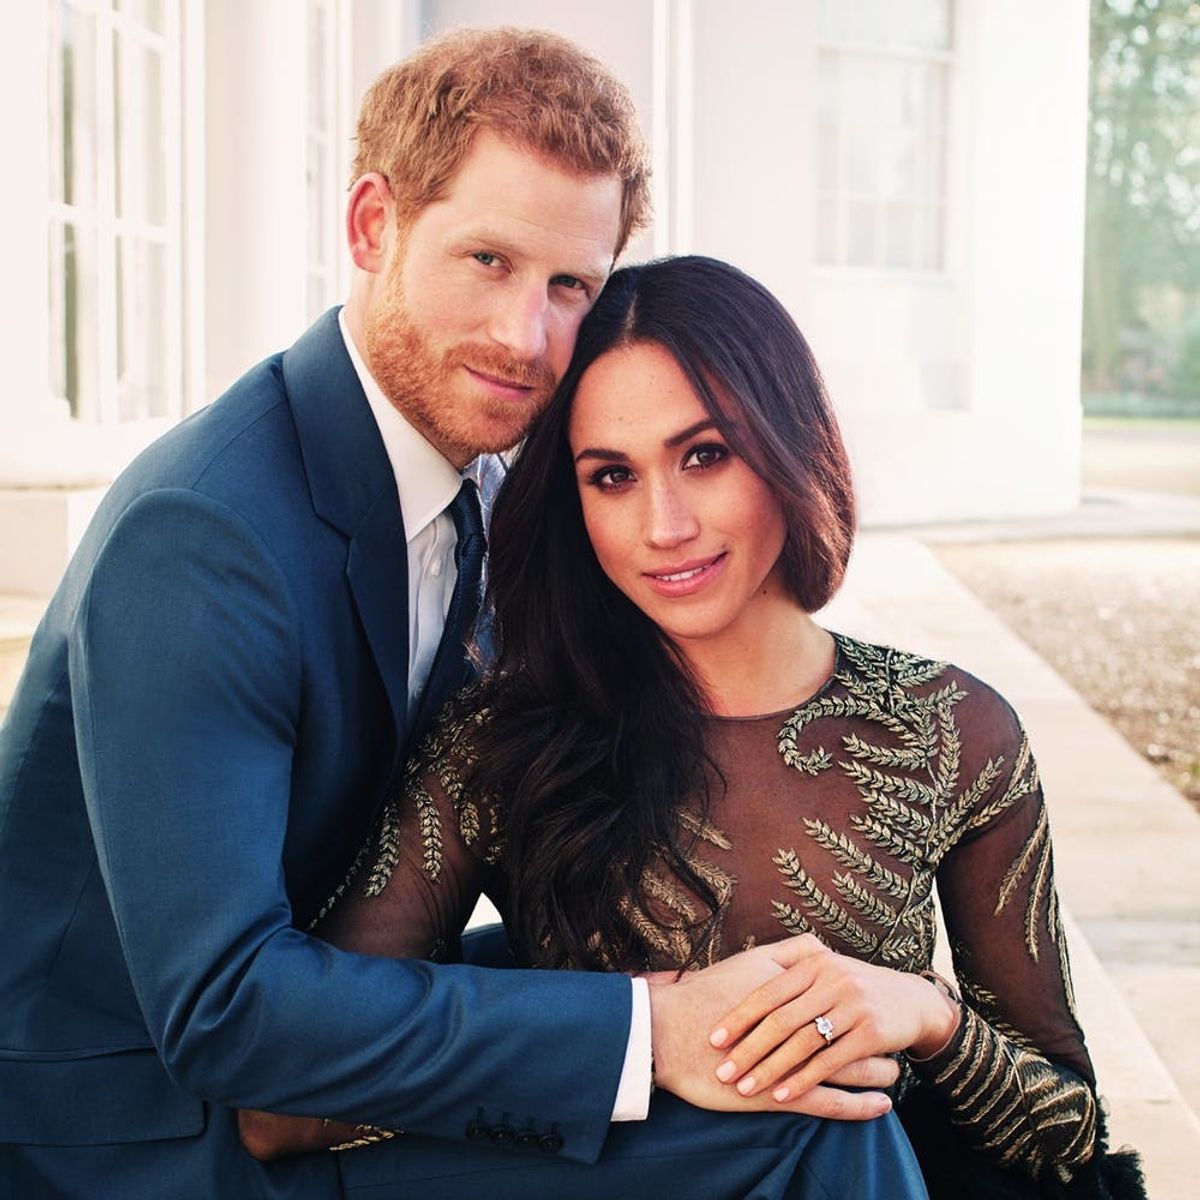 Prince Harry and Meghan Markle Look So in Love in Their New Official Engagement Photos